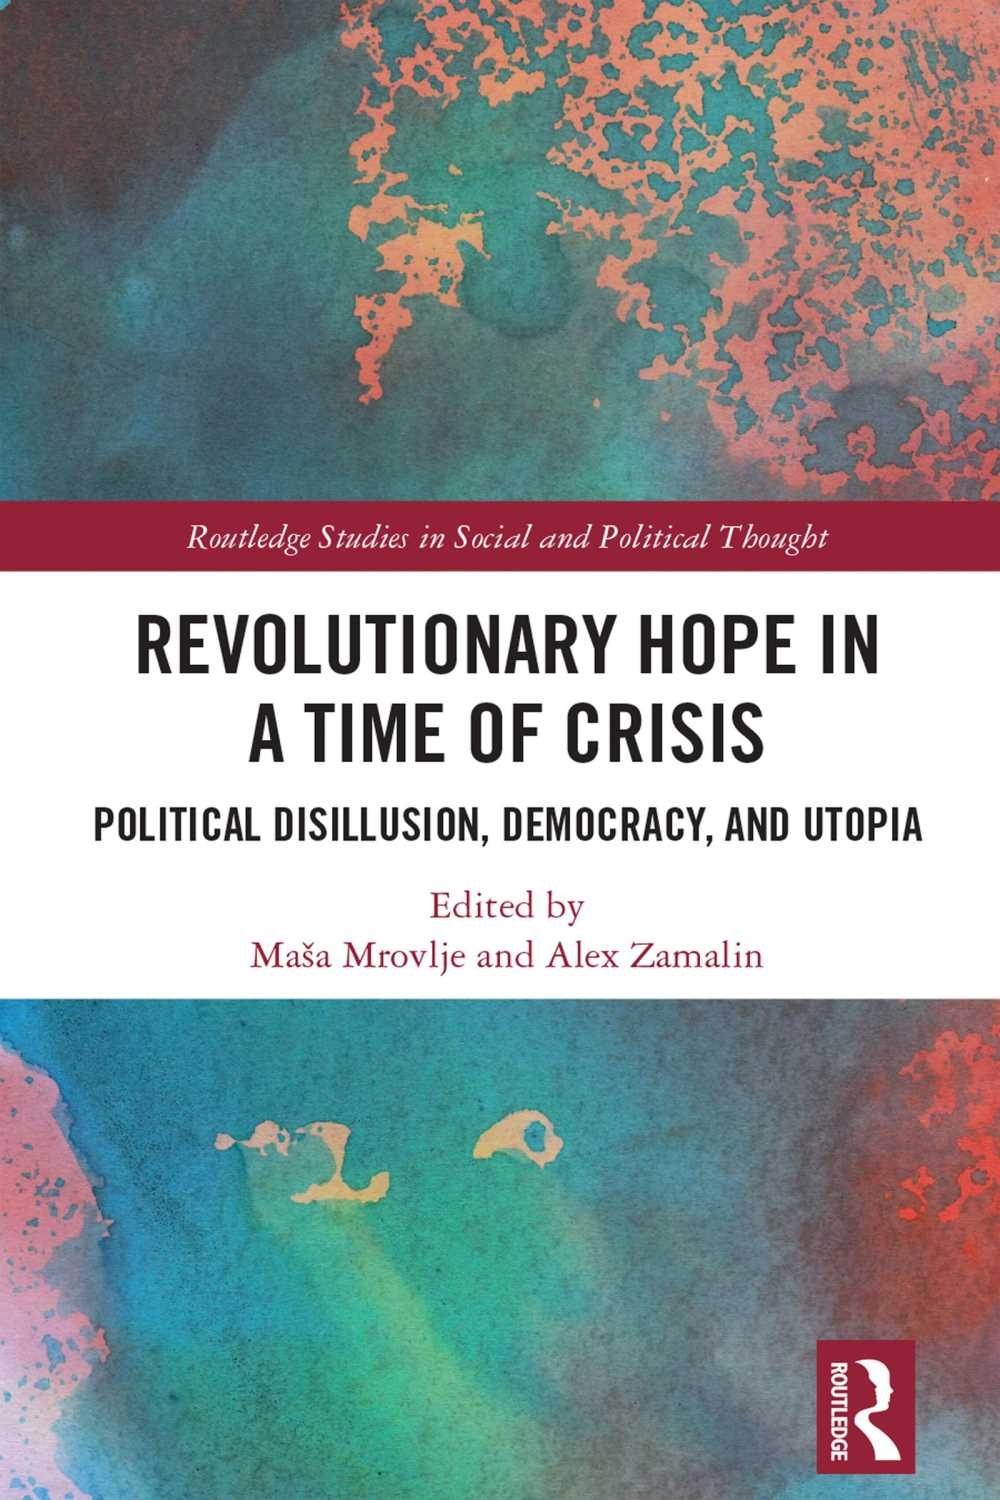 Revolutionary Hope in a Time of Crisis: Political Disillusion, Democracy, and Utopia